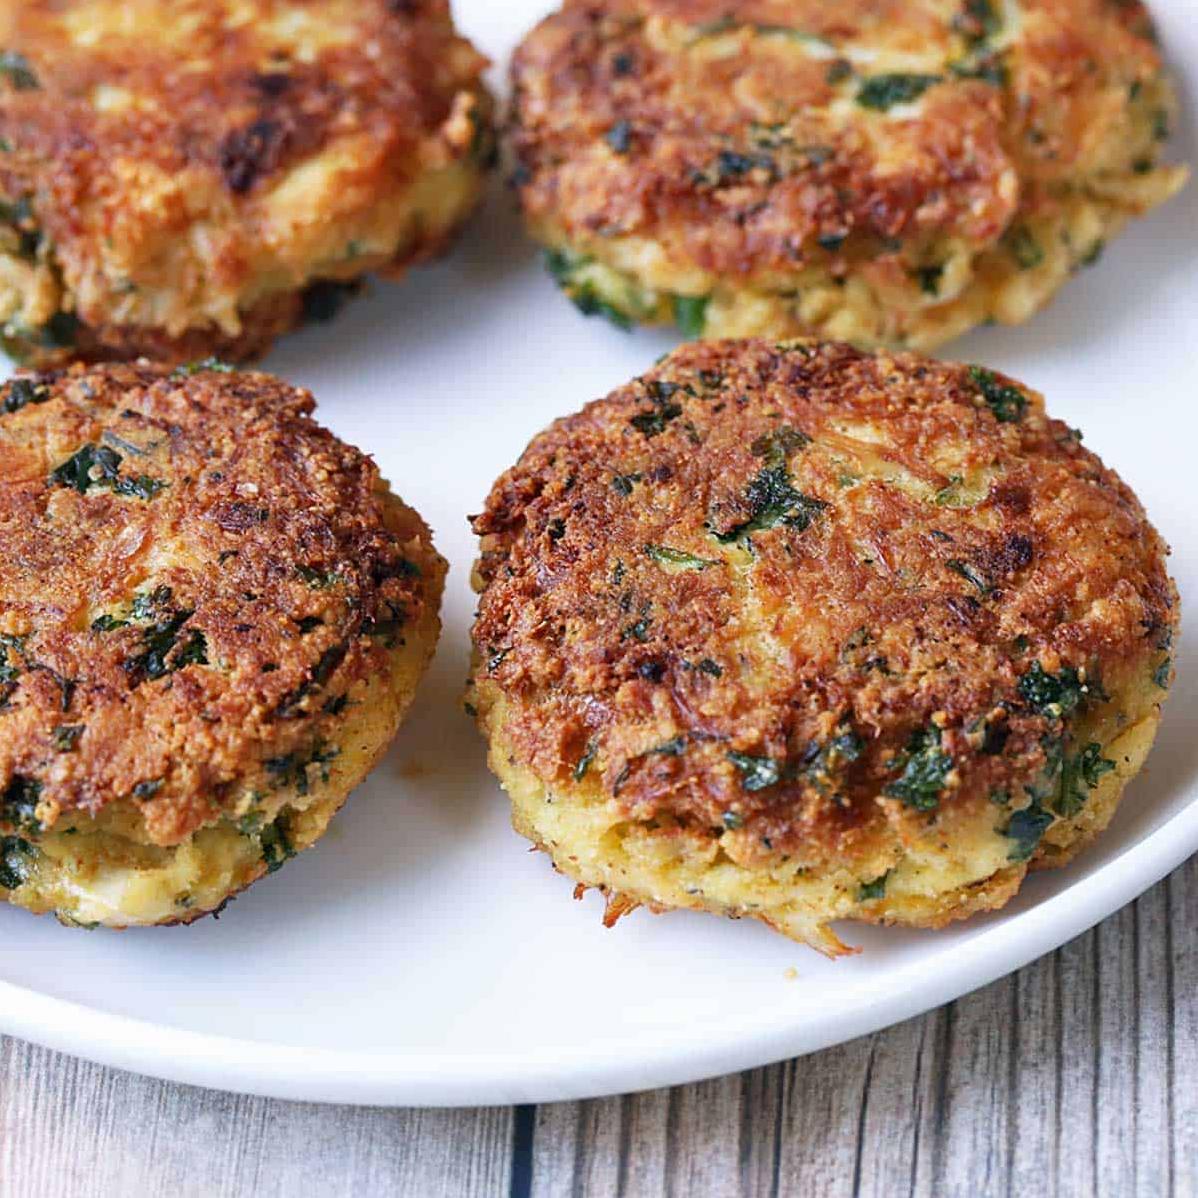  Savory and satisfying, these crabby patties are a must-try for seafood lovers on a gluten-free diet.